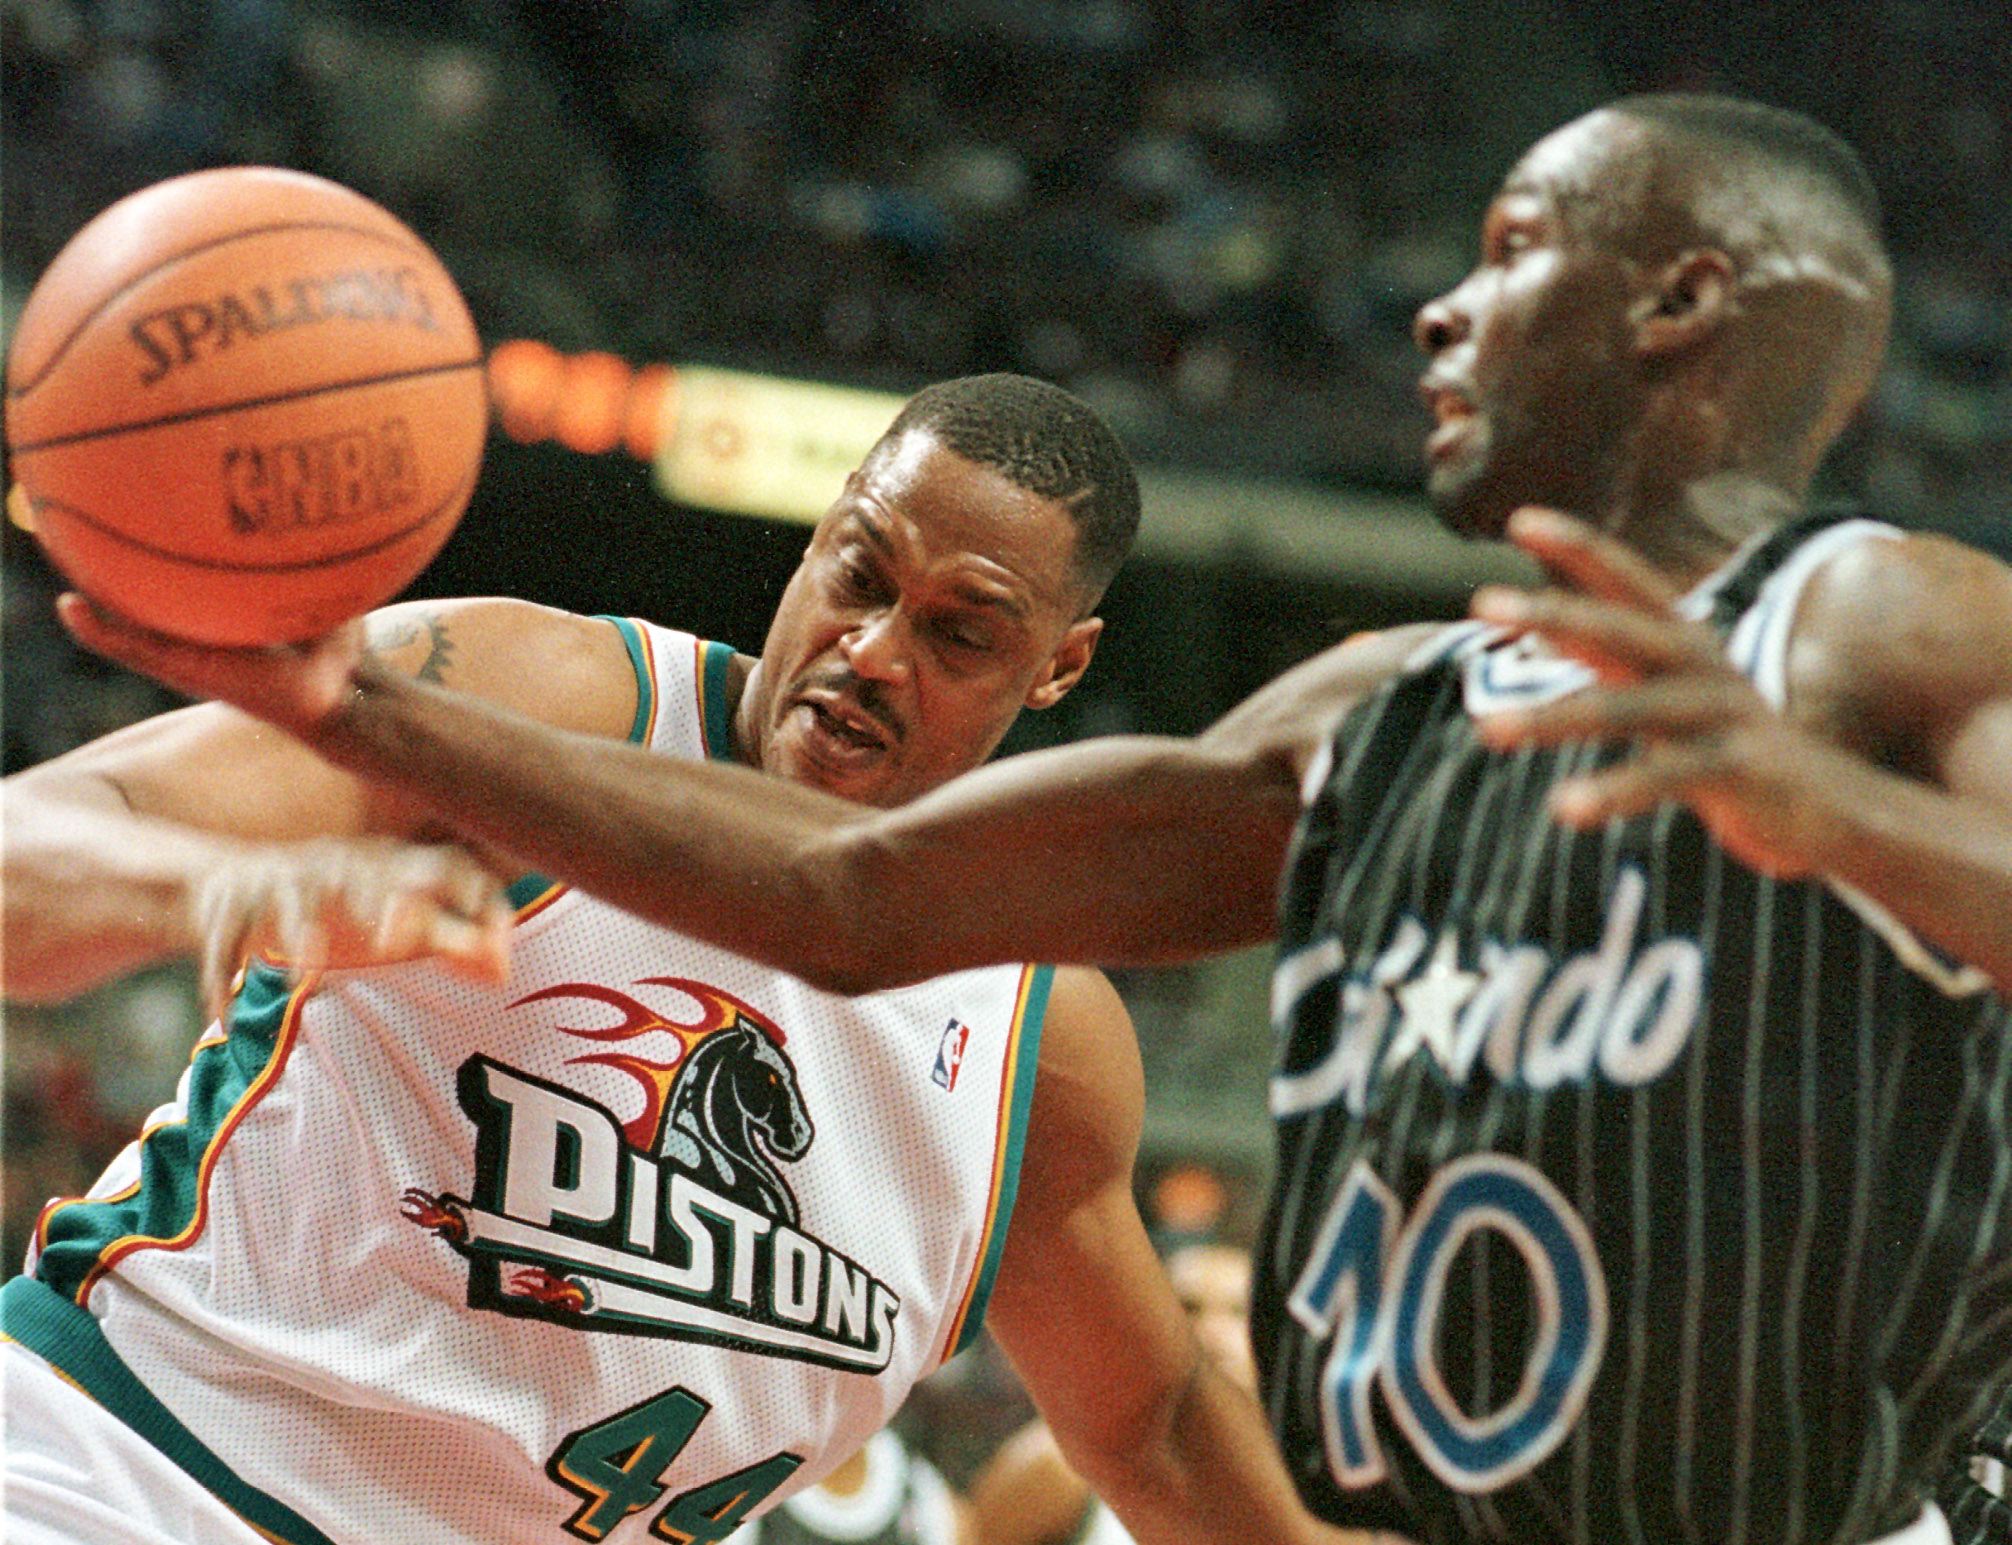 The Orlando Magic's Darrell Armstrong (R) gains control of the ball as he battles for a rebound with the Detroit Pistons' Rick Mahorn .